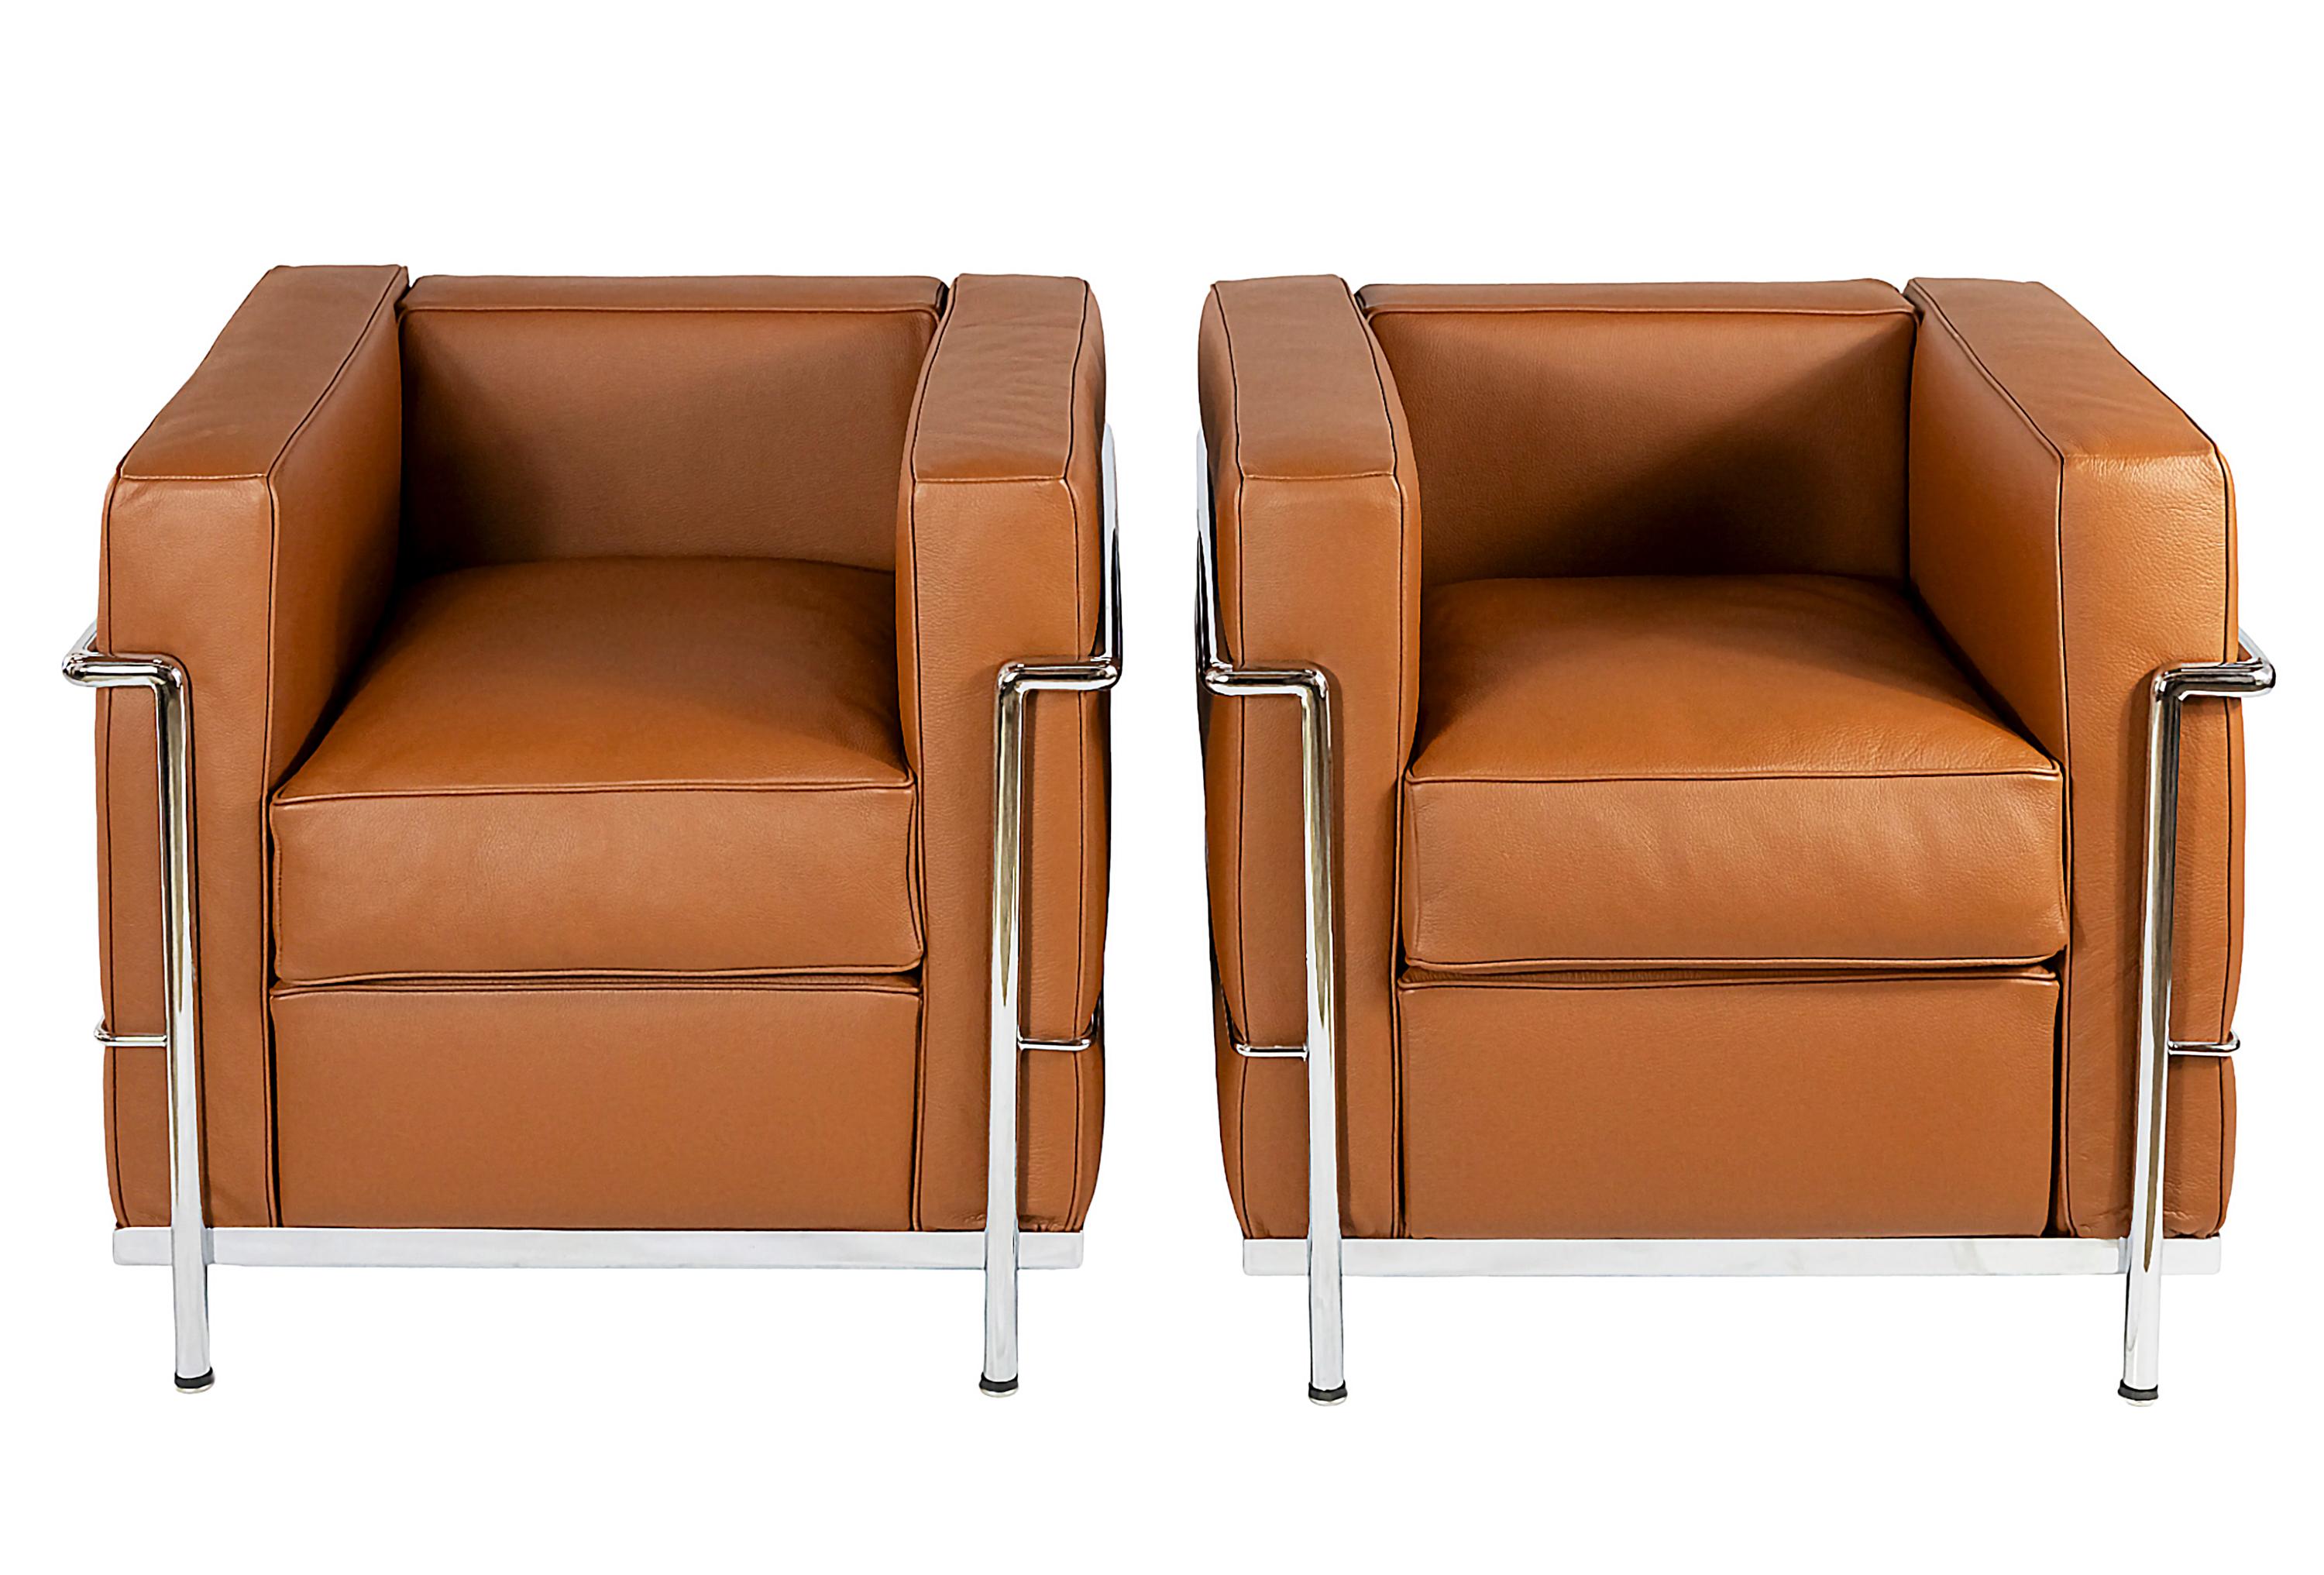 Pair of LC2 armchairs designed by Le Corbusier, Pierre Jeanneret, Charlotte Perriand.
Numbers engraved on the frame and labeled Cassina.
In cognac leather, chromed steel tube frame.
Very good vintage condition. 

 

 